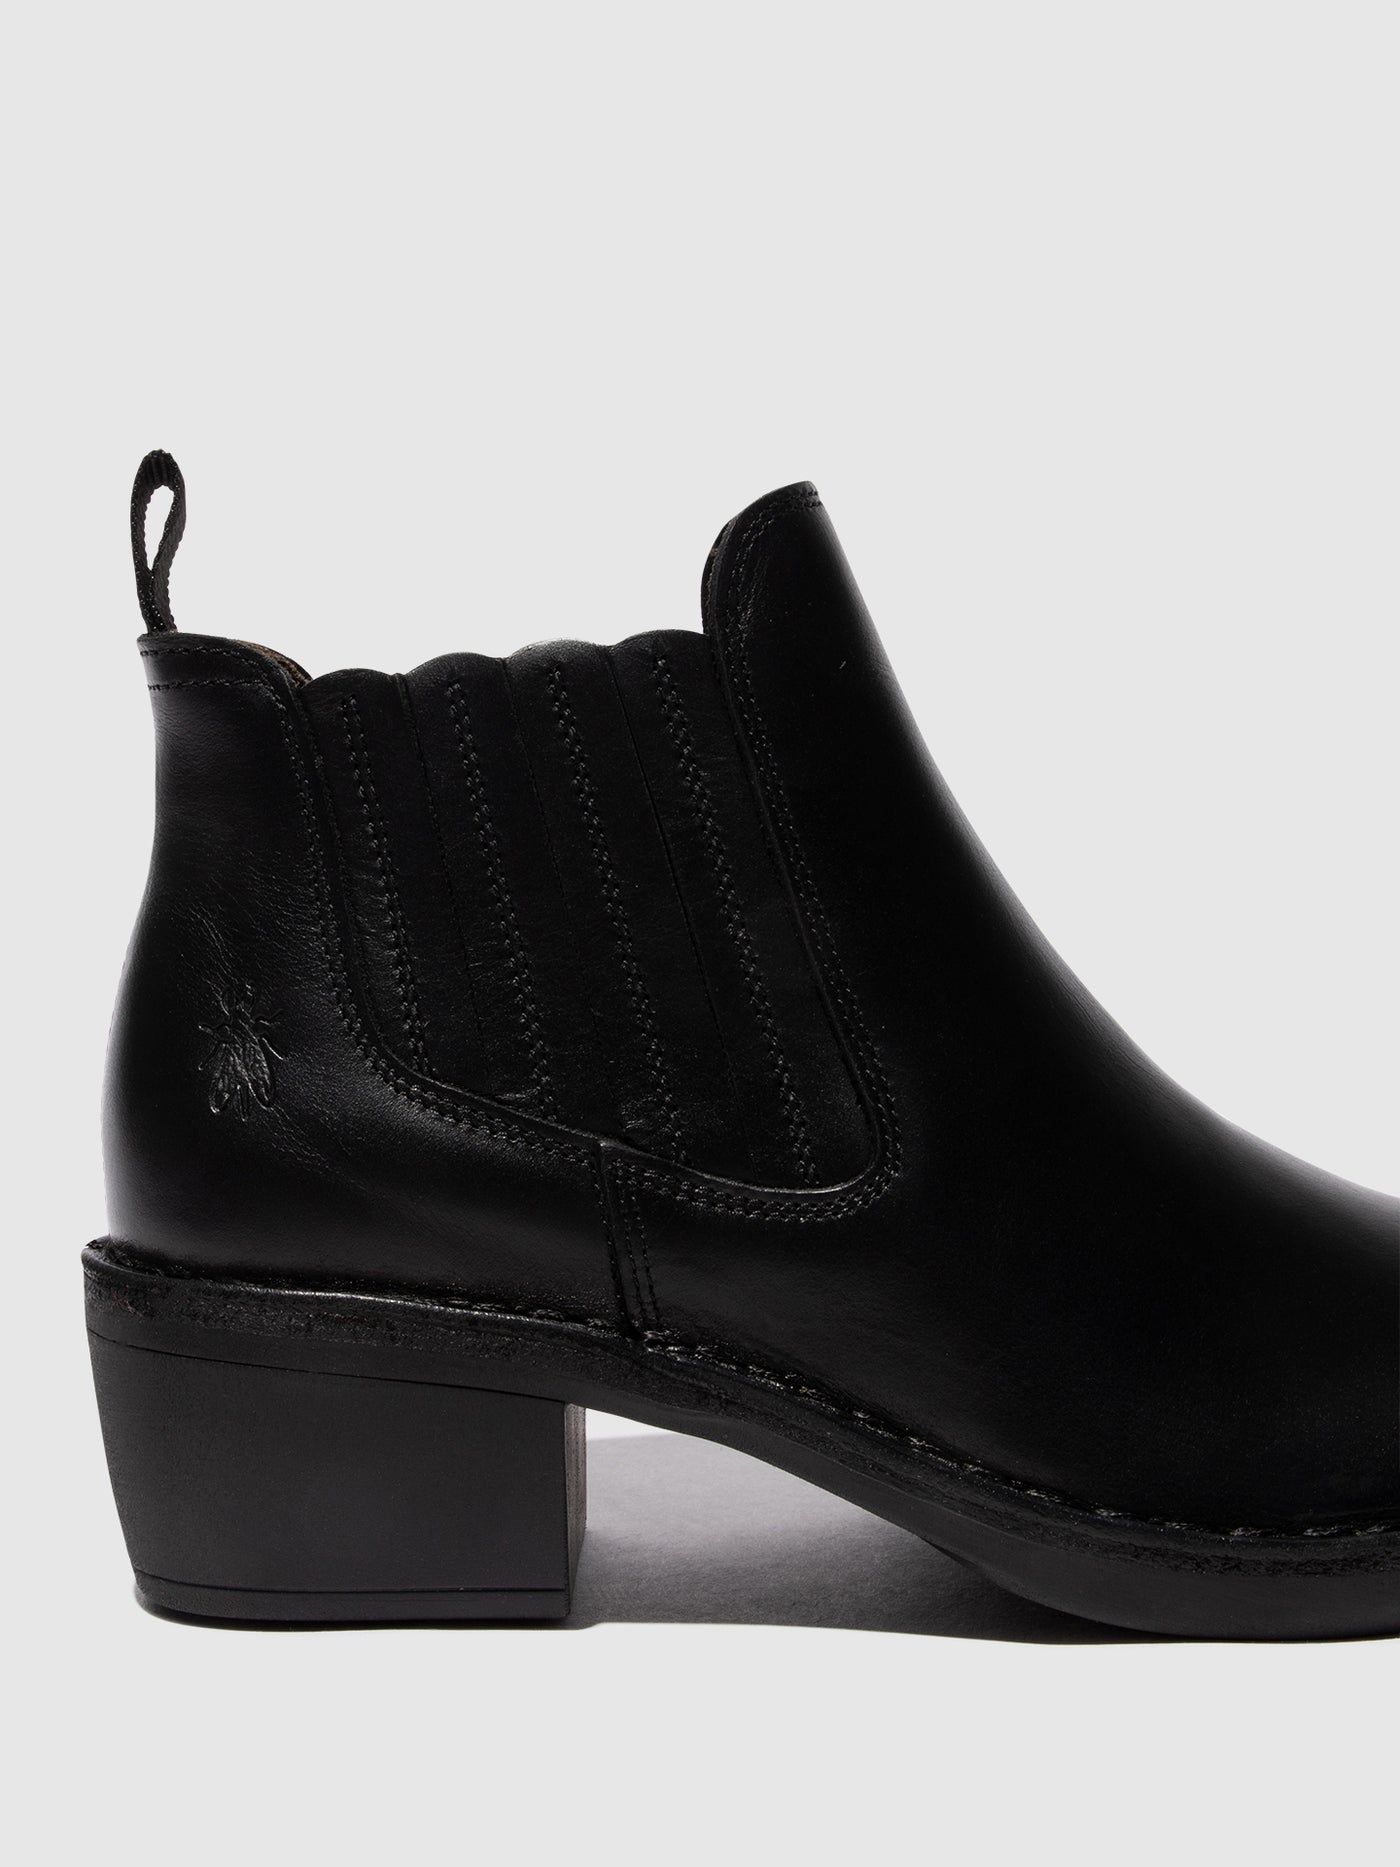 Slip-on Ankle Boots MOOF103FLY BLACK